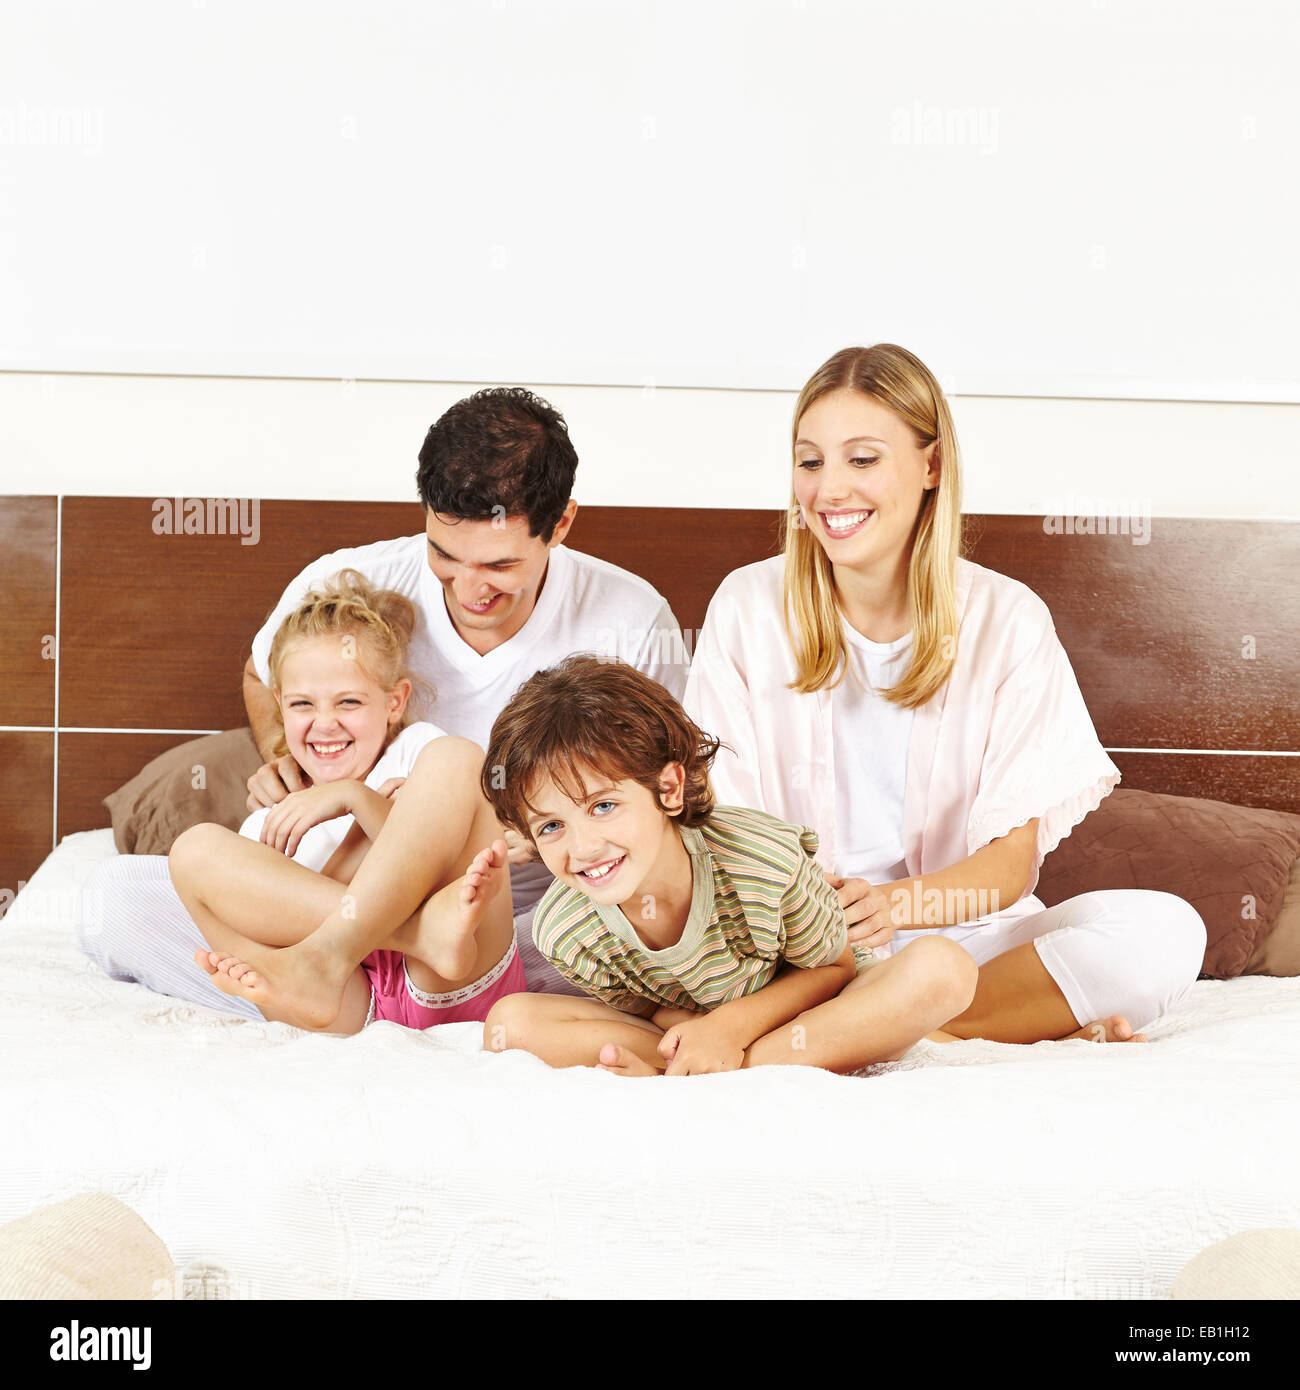 Laughing family having fun with children on bed in a bedroom Stock Photo